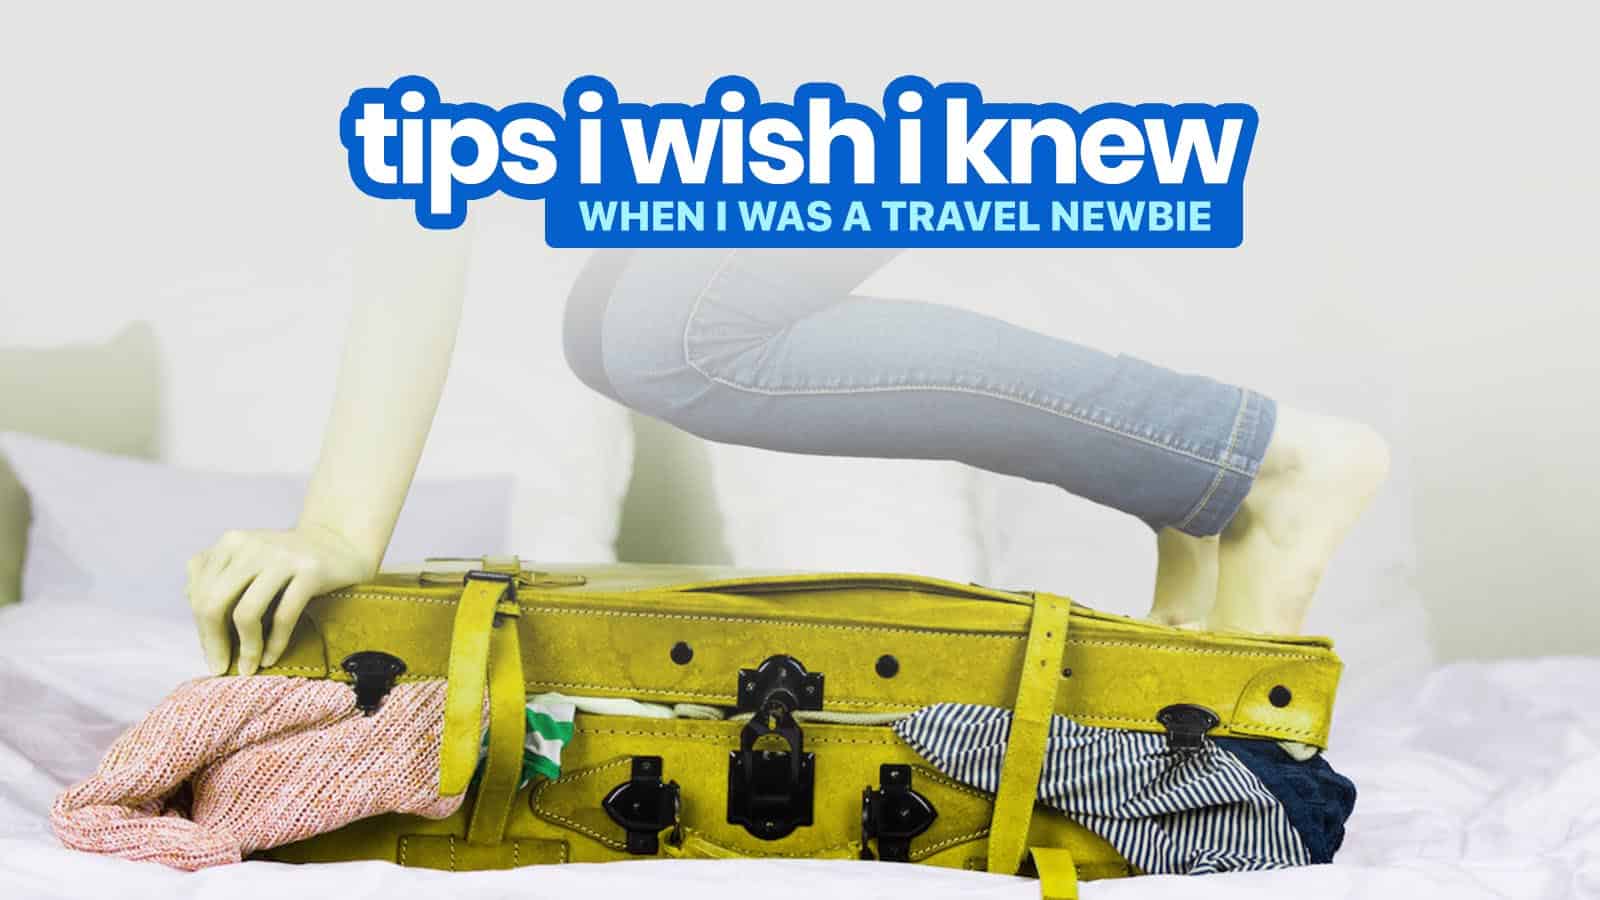 7 THINGS I WISH I KNEW when I was a Newbie: Packing & Luggage Tips